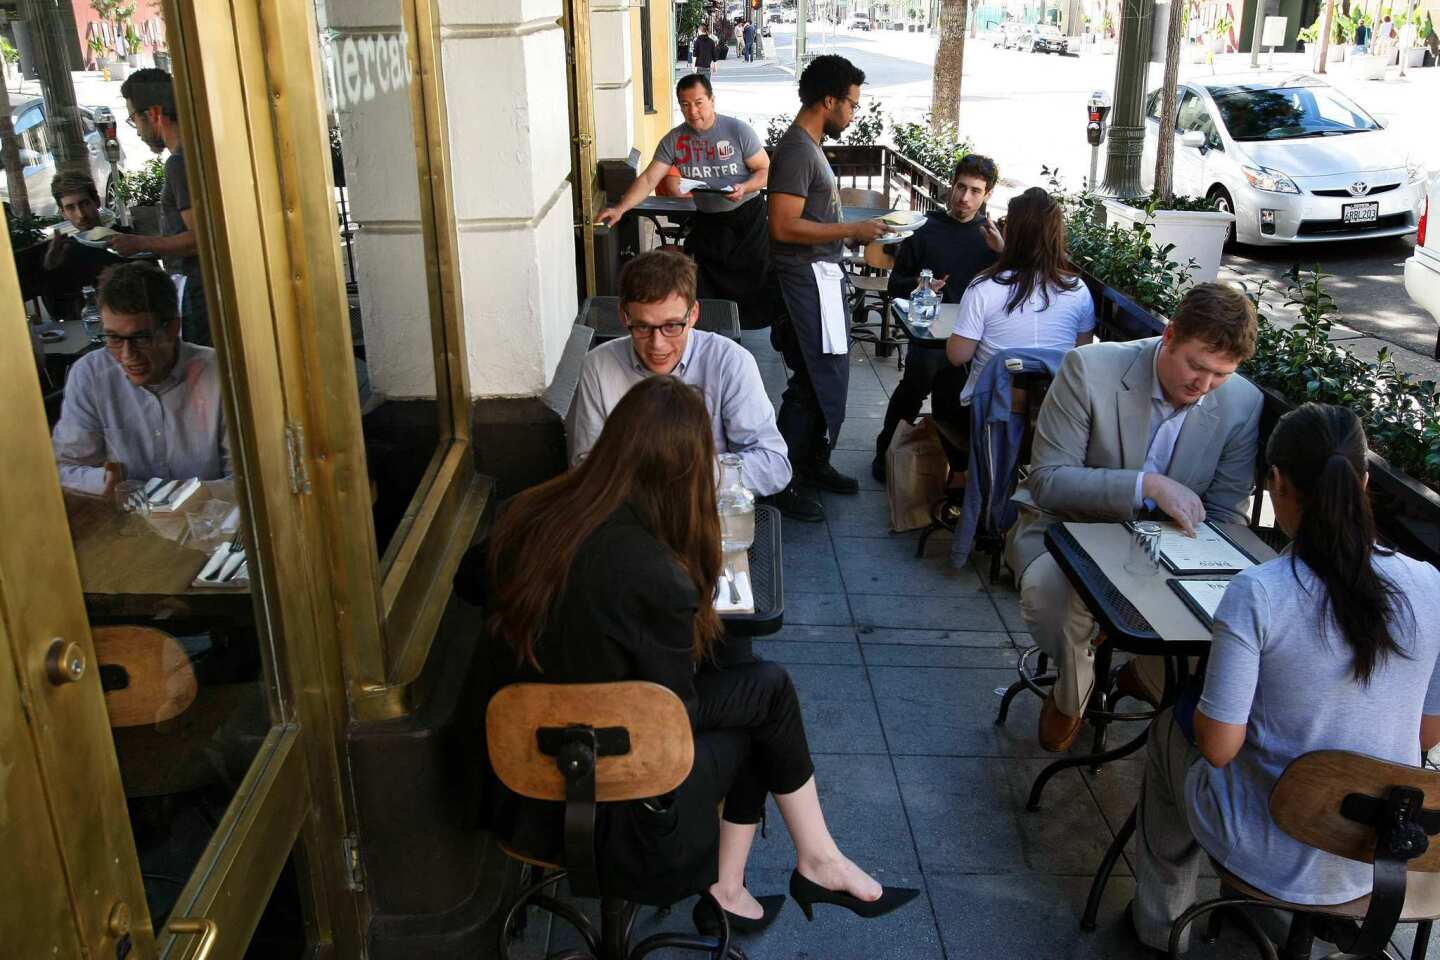 Outdoor tables offer a view of the downtown street scene.